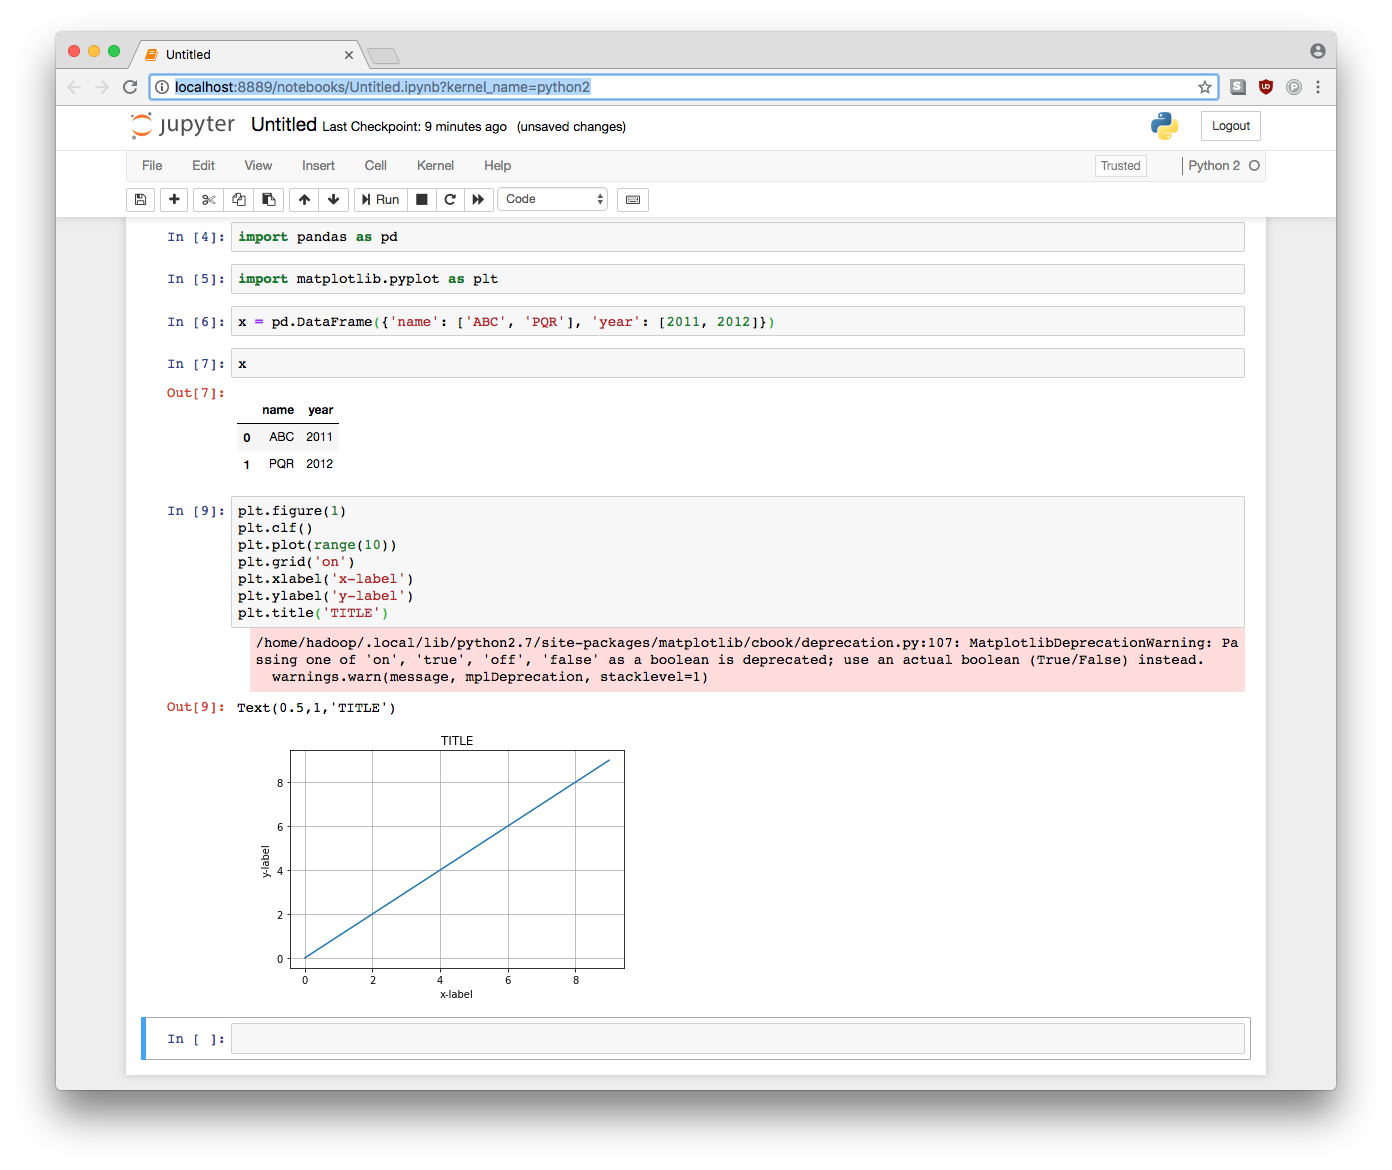 Jupyter notebook: import packages like pandas